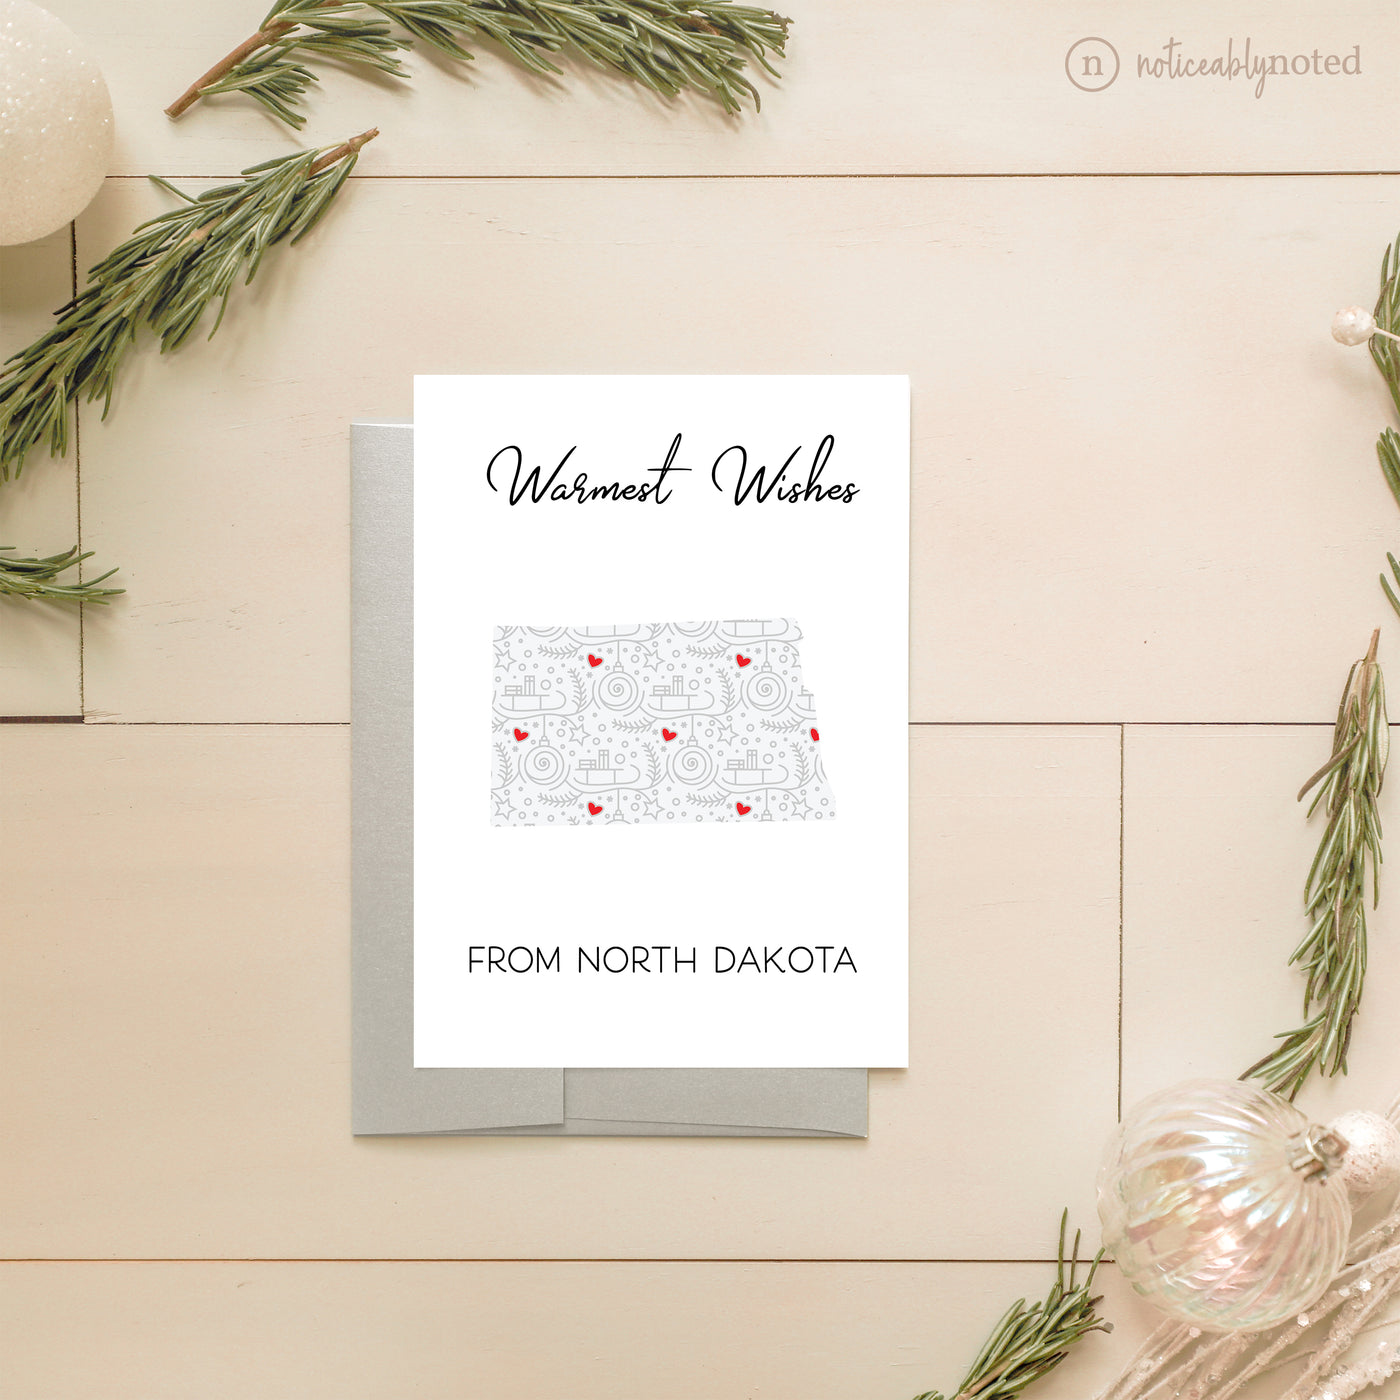 ND Holiday Greeting Cards | Noticeably Noted